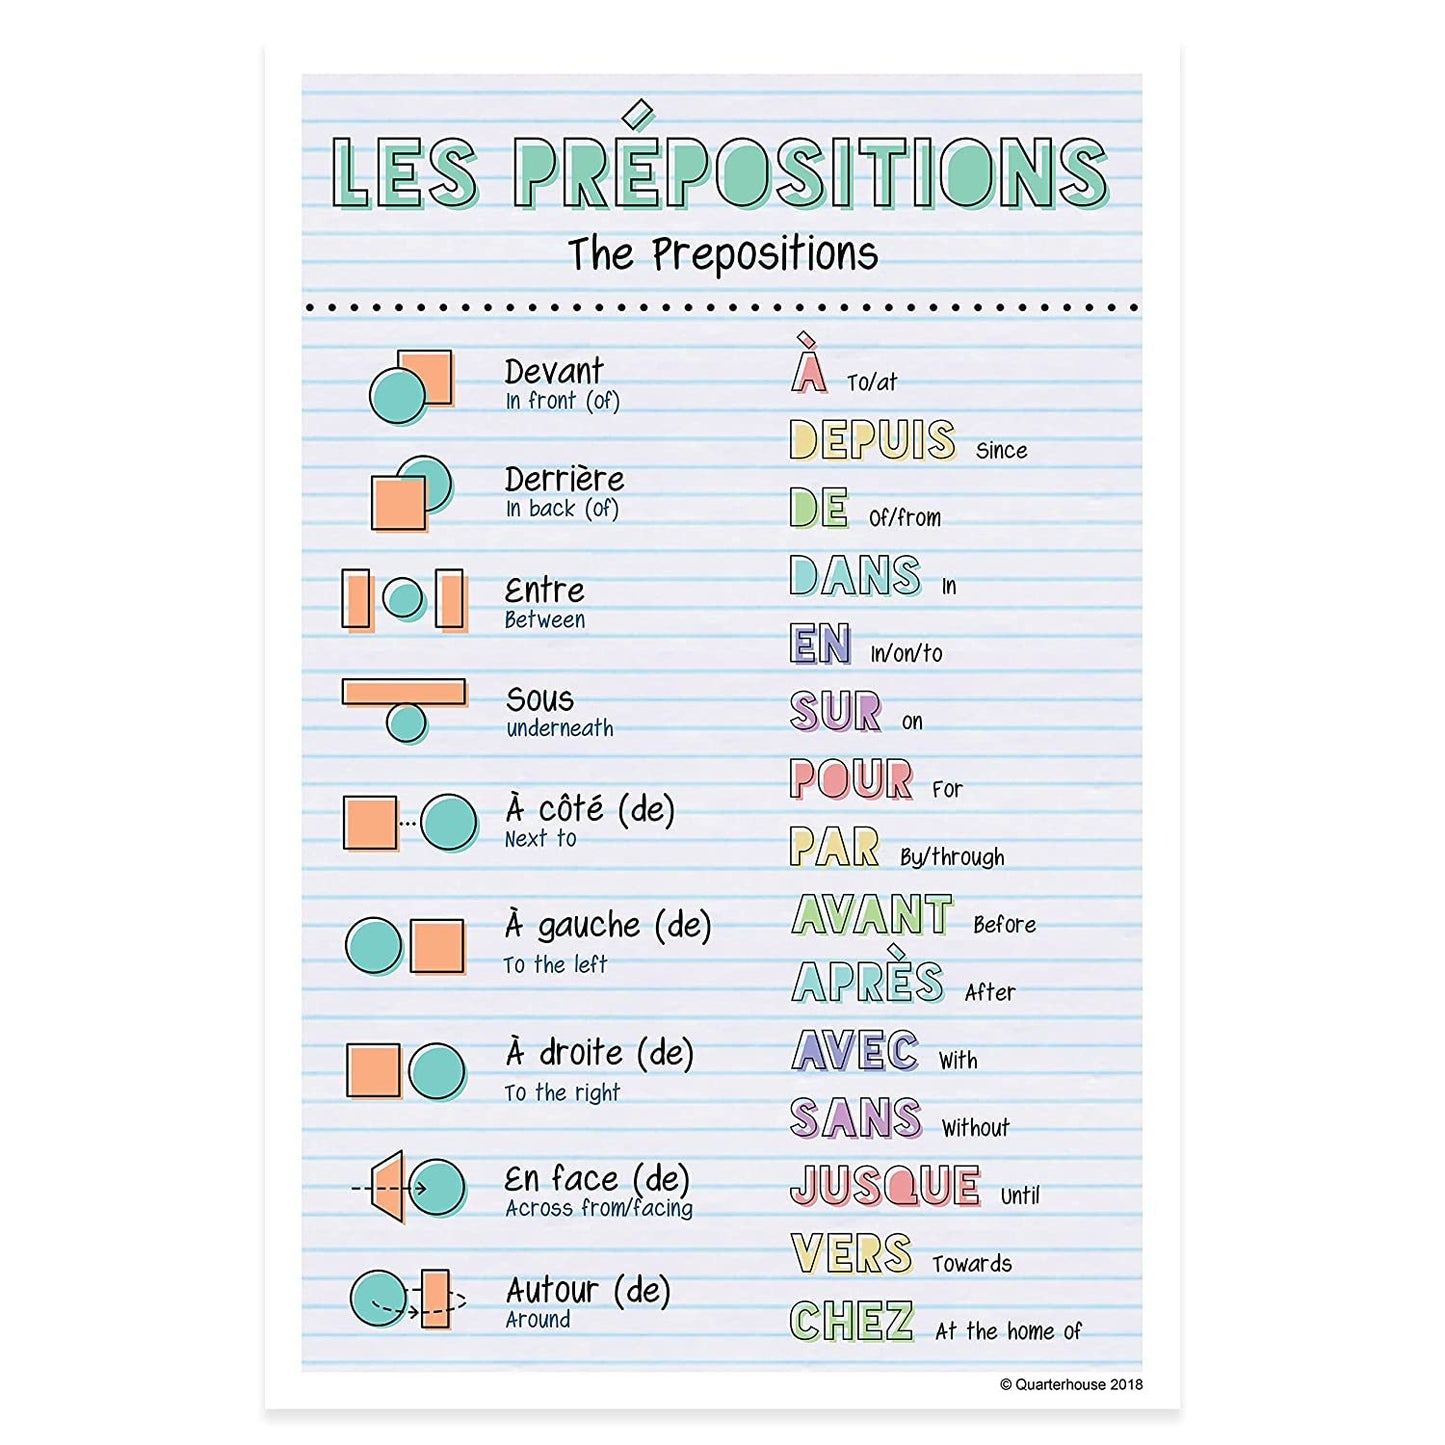 Quarterhouse French Verbs & Beginner Vocabulary (Set H) Poster Set, French Classroom Learning Materials for K-12 Students and Teachers, Set of 11, 12 x 18 Inches, Extra Durable